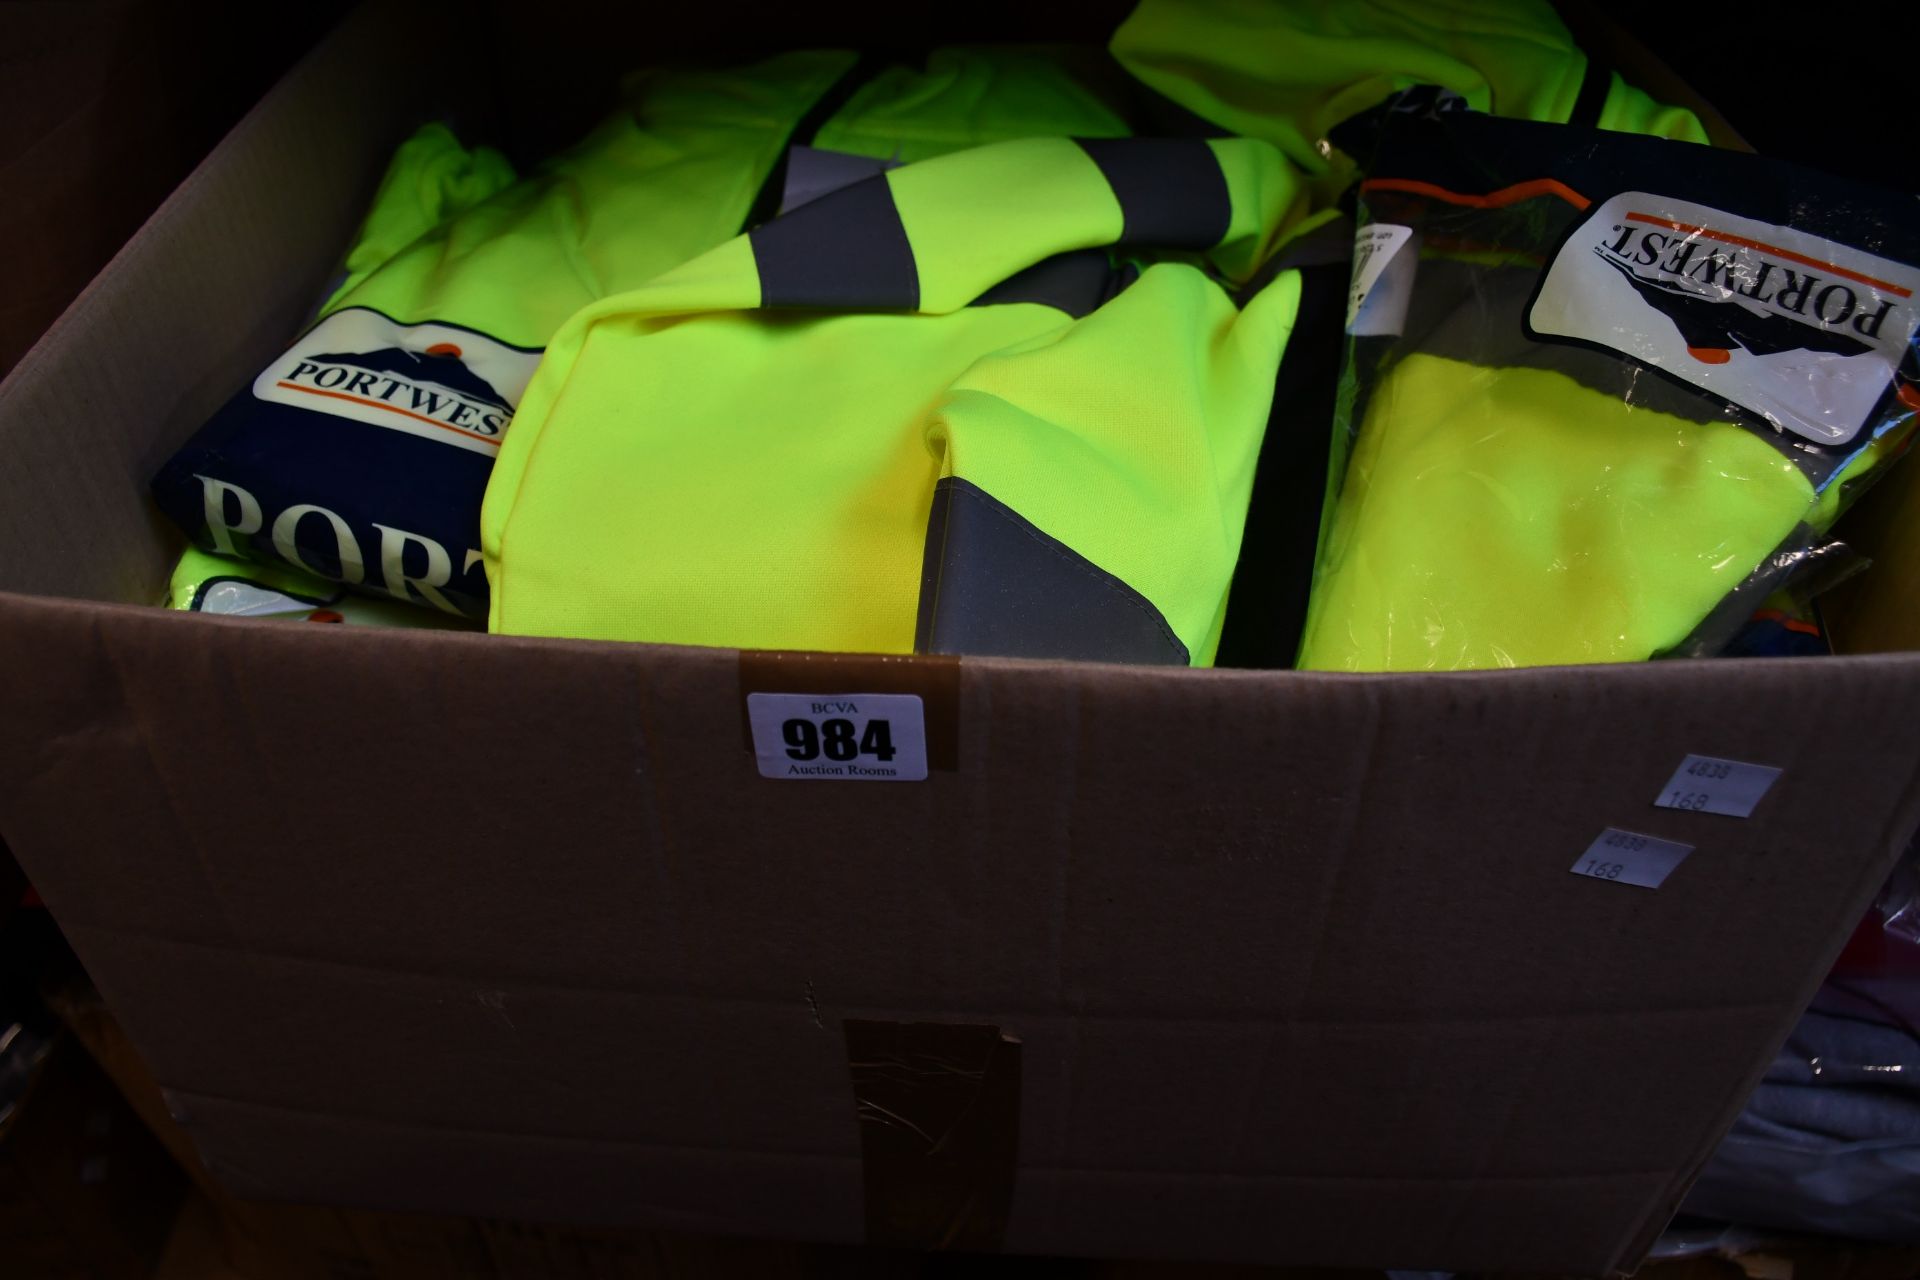 Eleven as new Portwest Xenon Rugby sweatshirts in yellow (M - XXL).